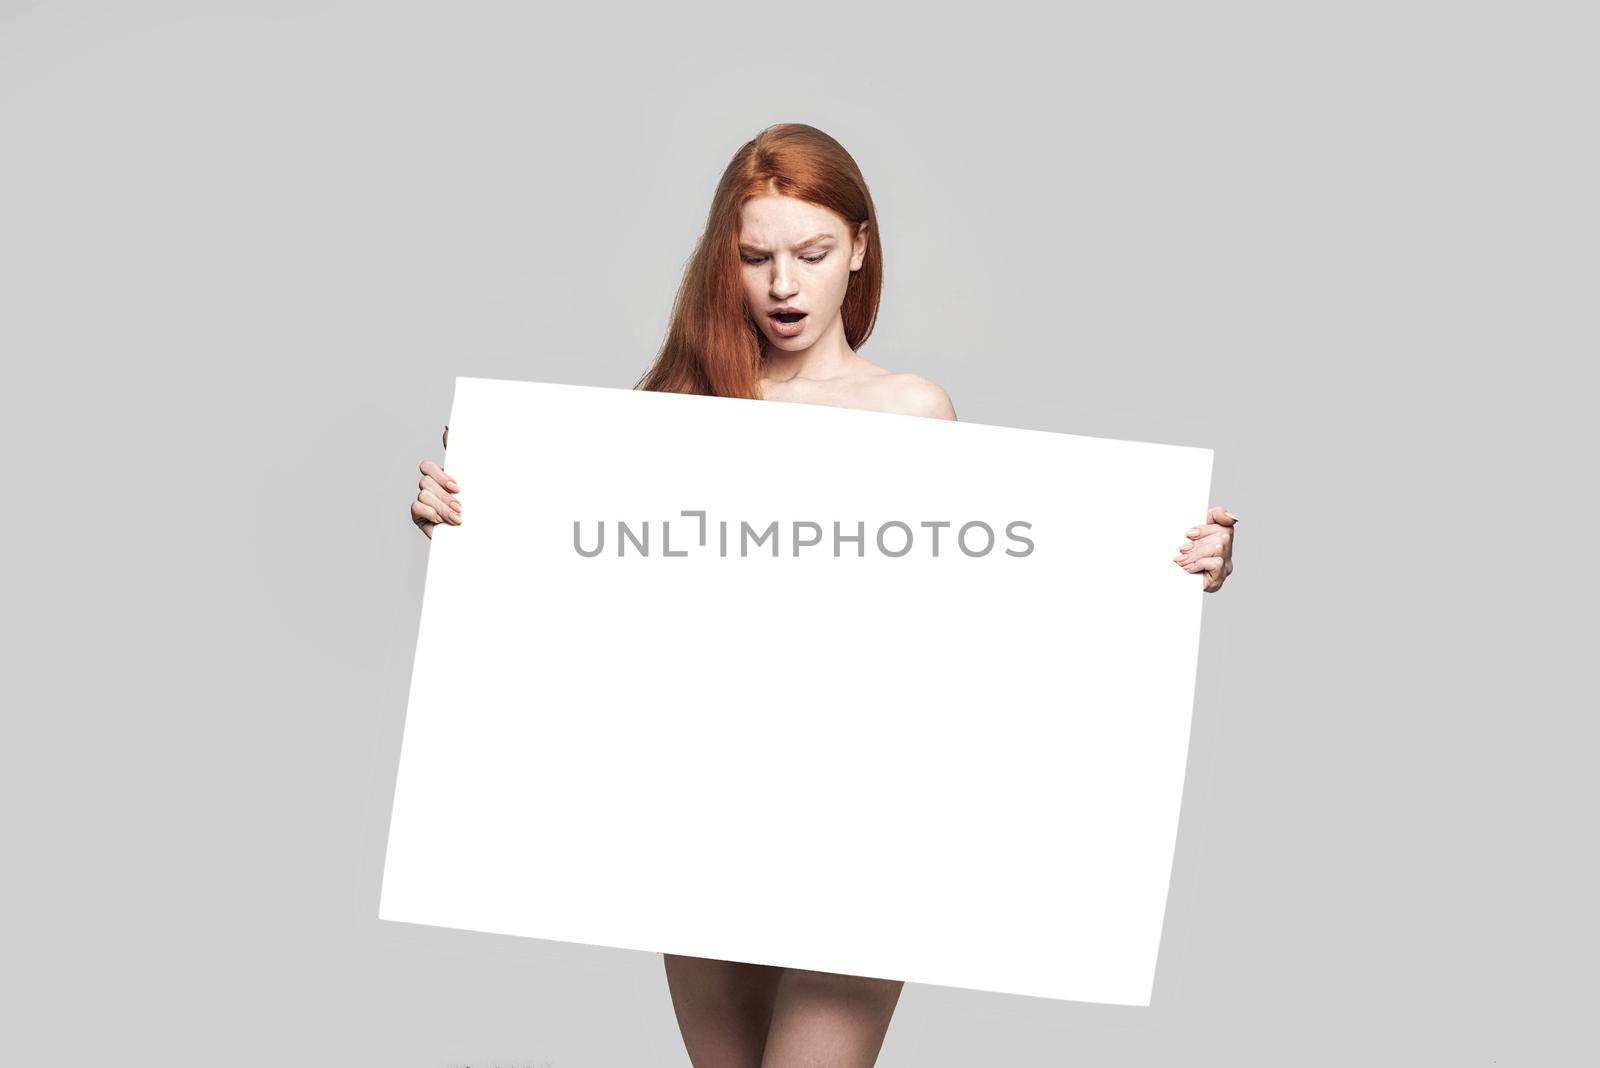 Shocked young redhead woman holding empty blank board and looking at it while standing against grey background by friendsstock